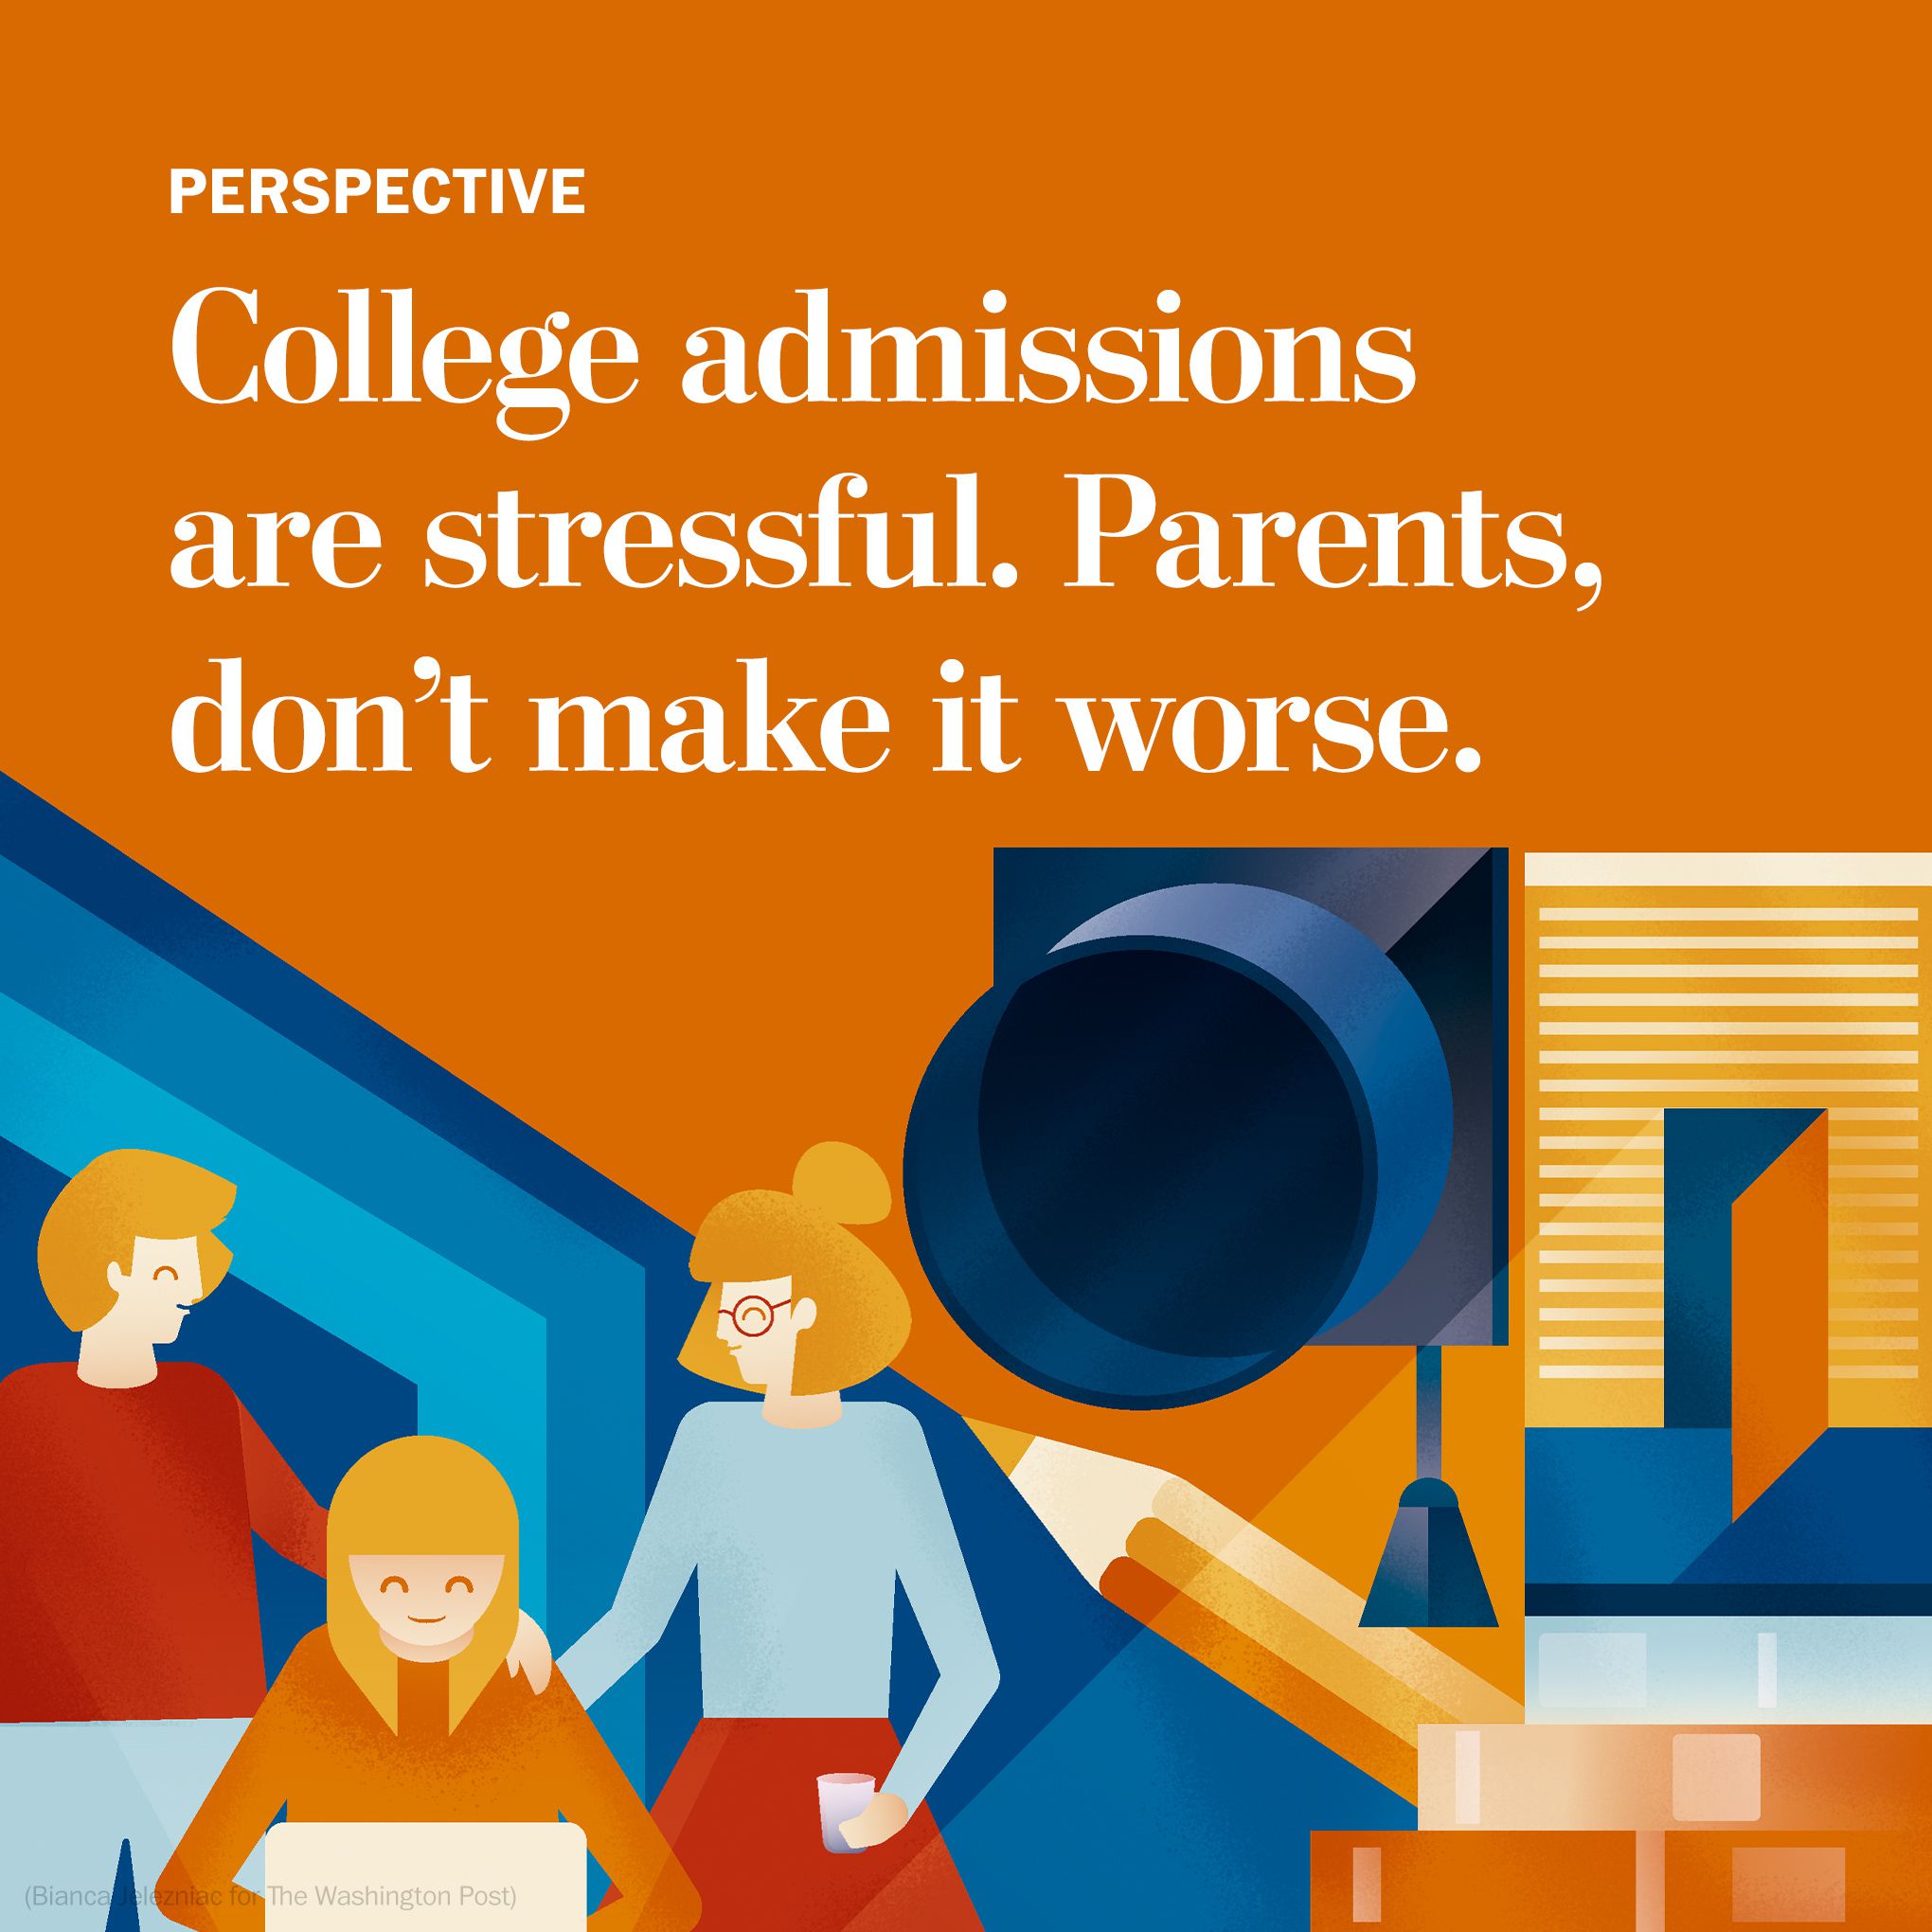 How University Admissions Impact Students' Path to Success